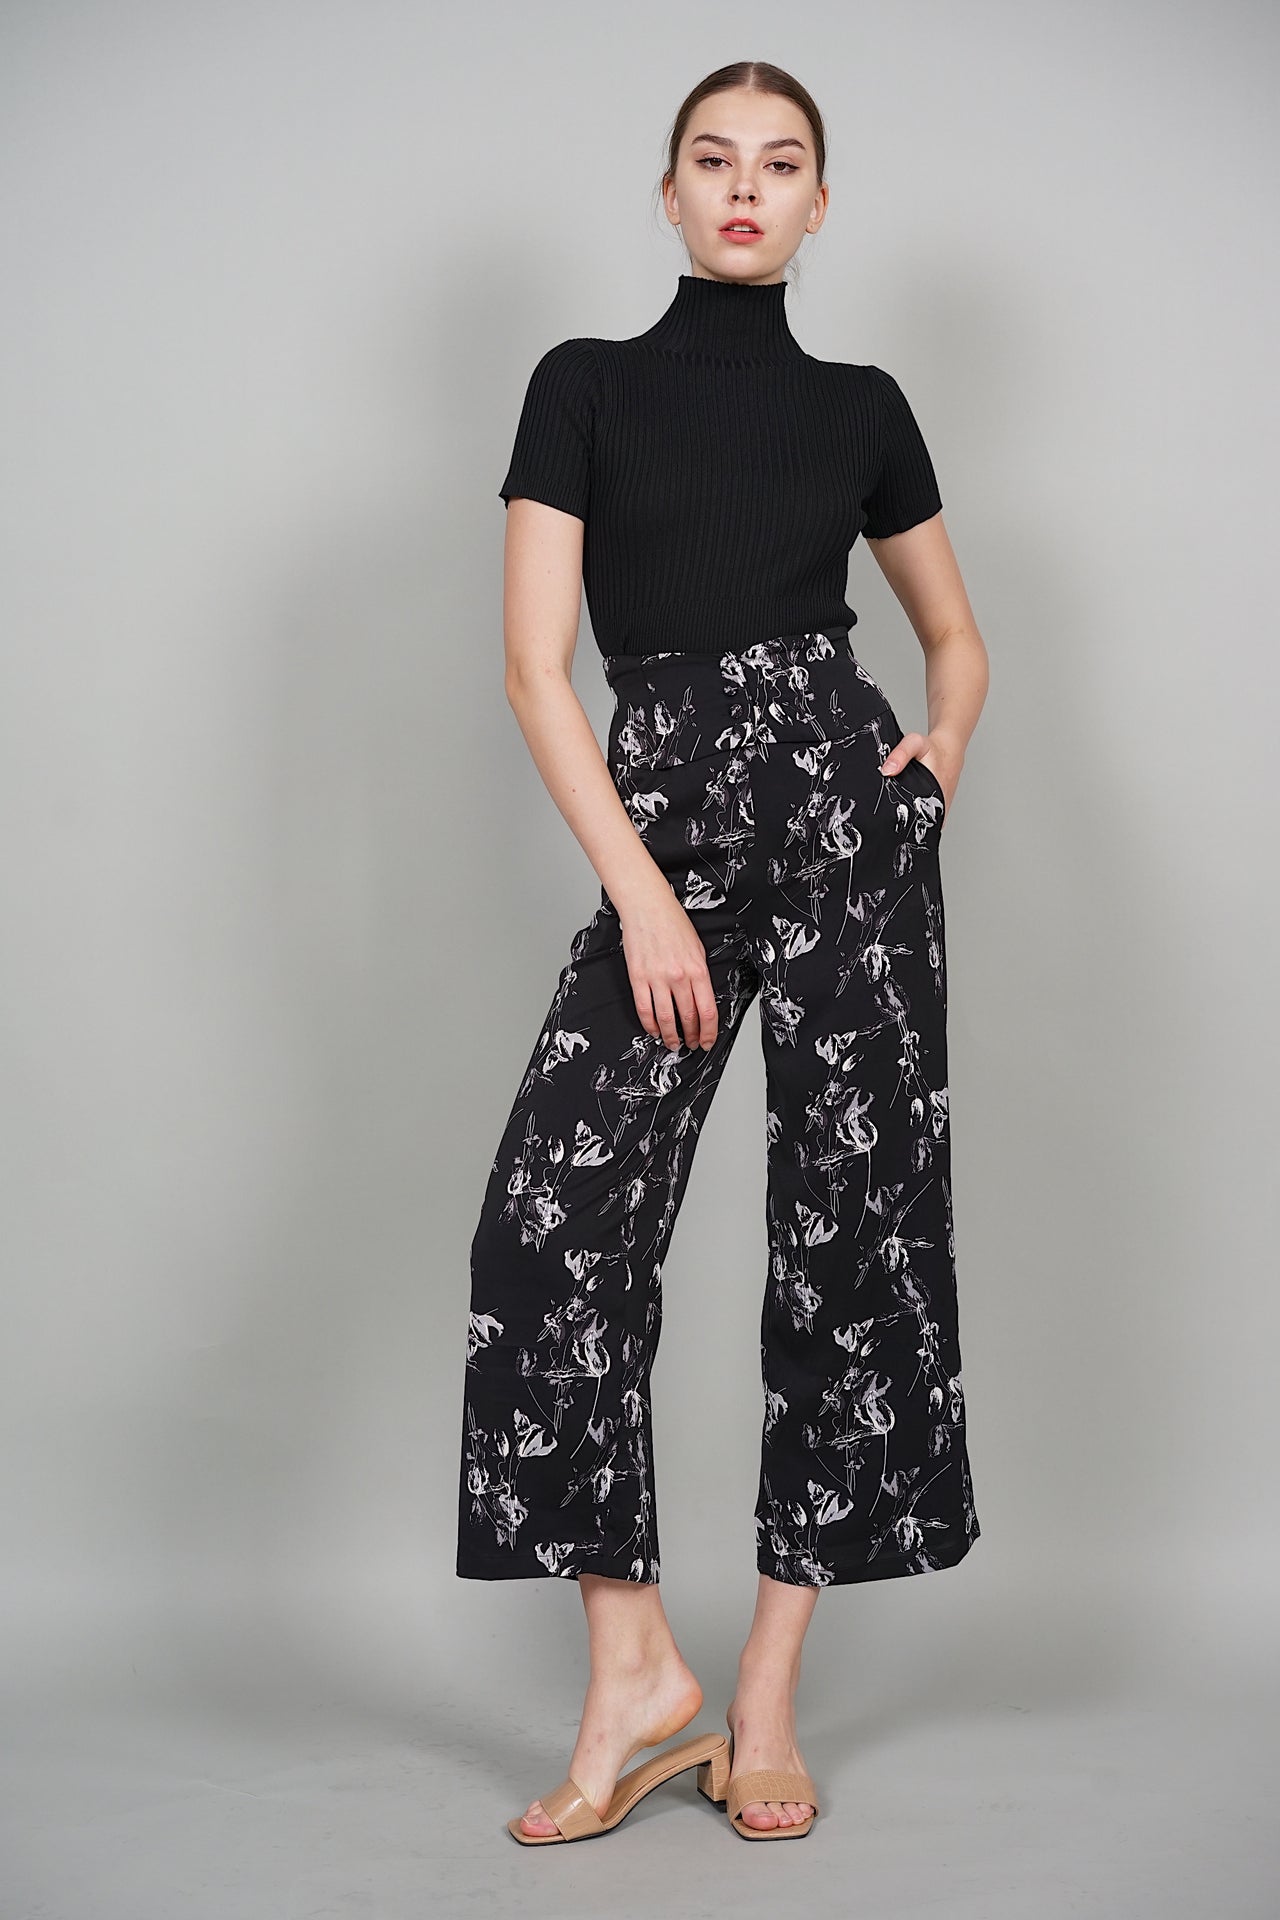 Yira High Waisted Pants in Black Floral